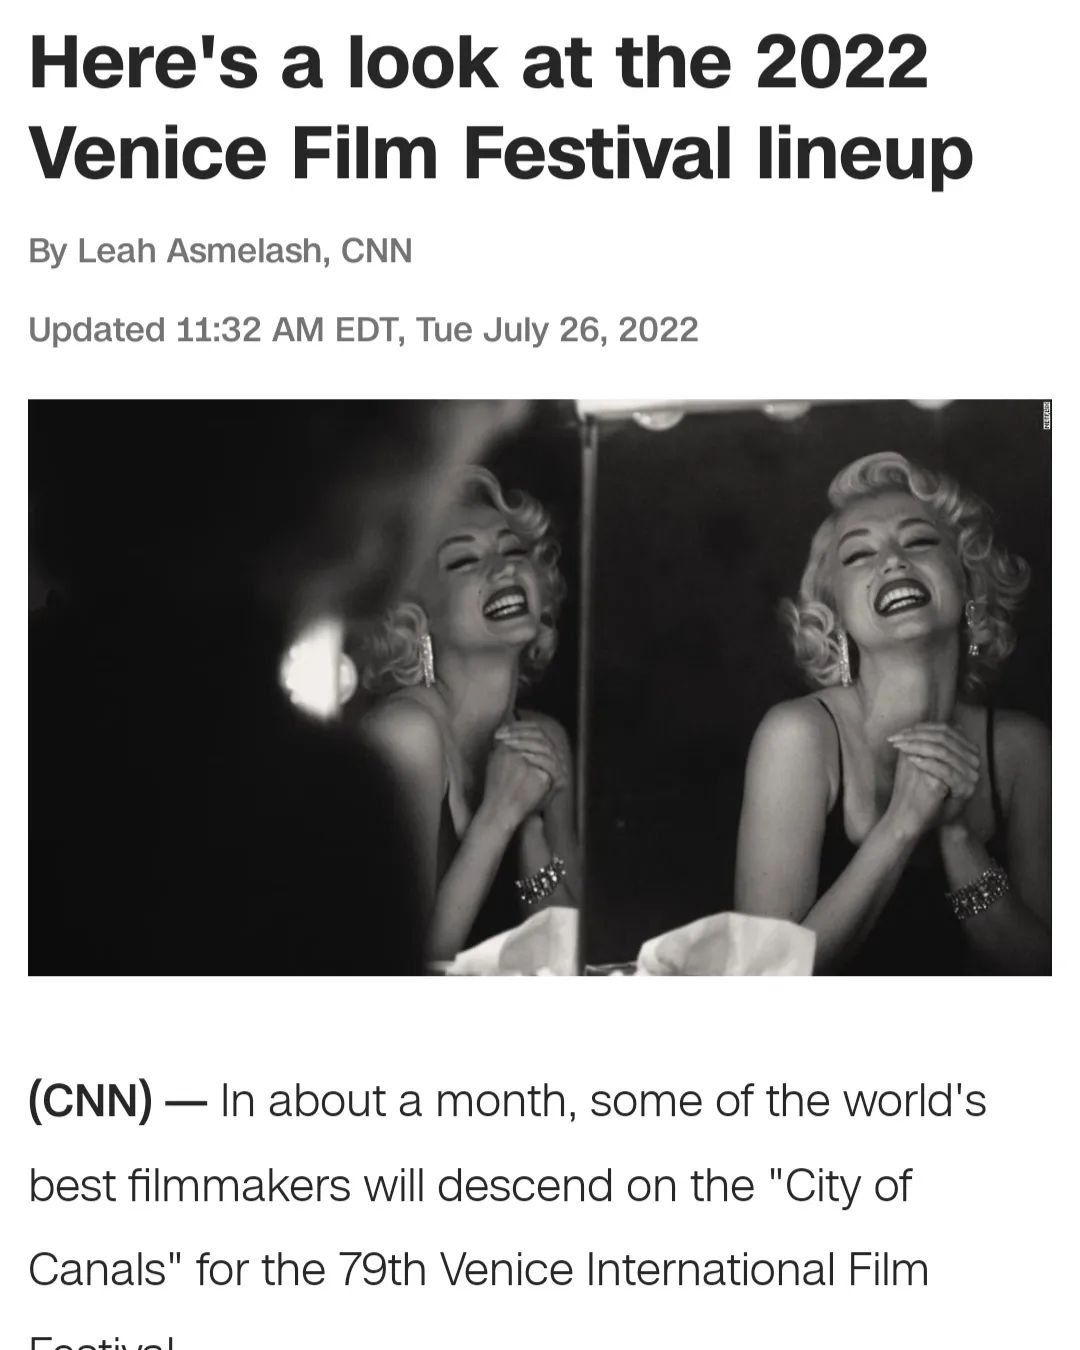 Stanulis Films "Monica" To Present At Venice Film Festival!